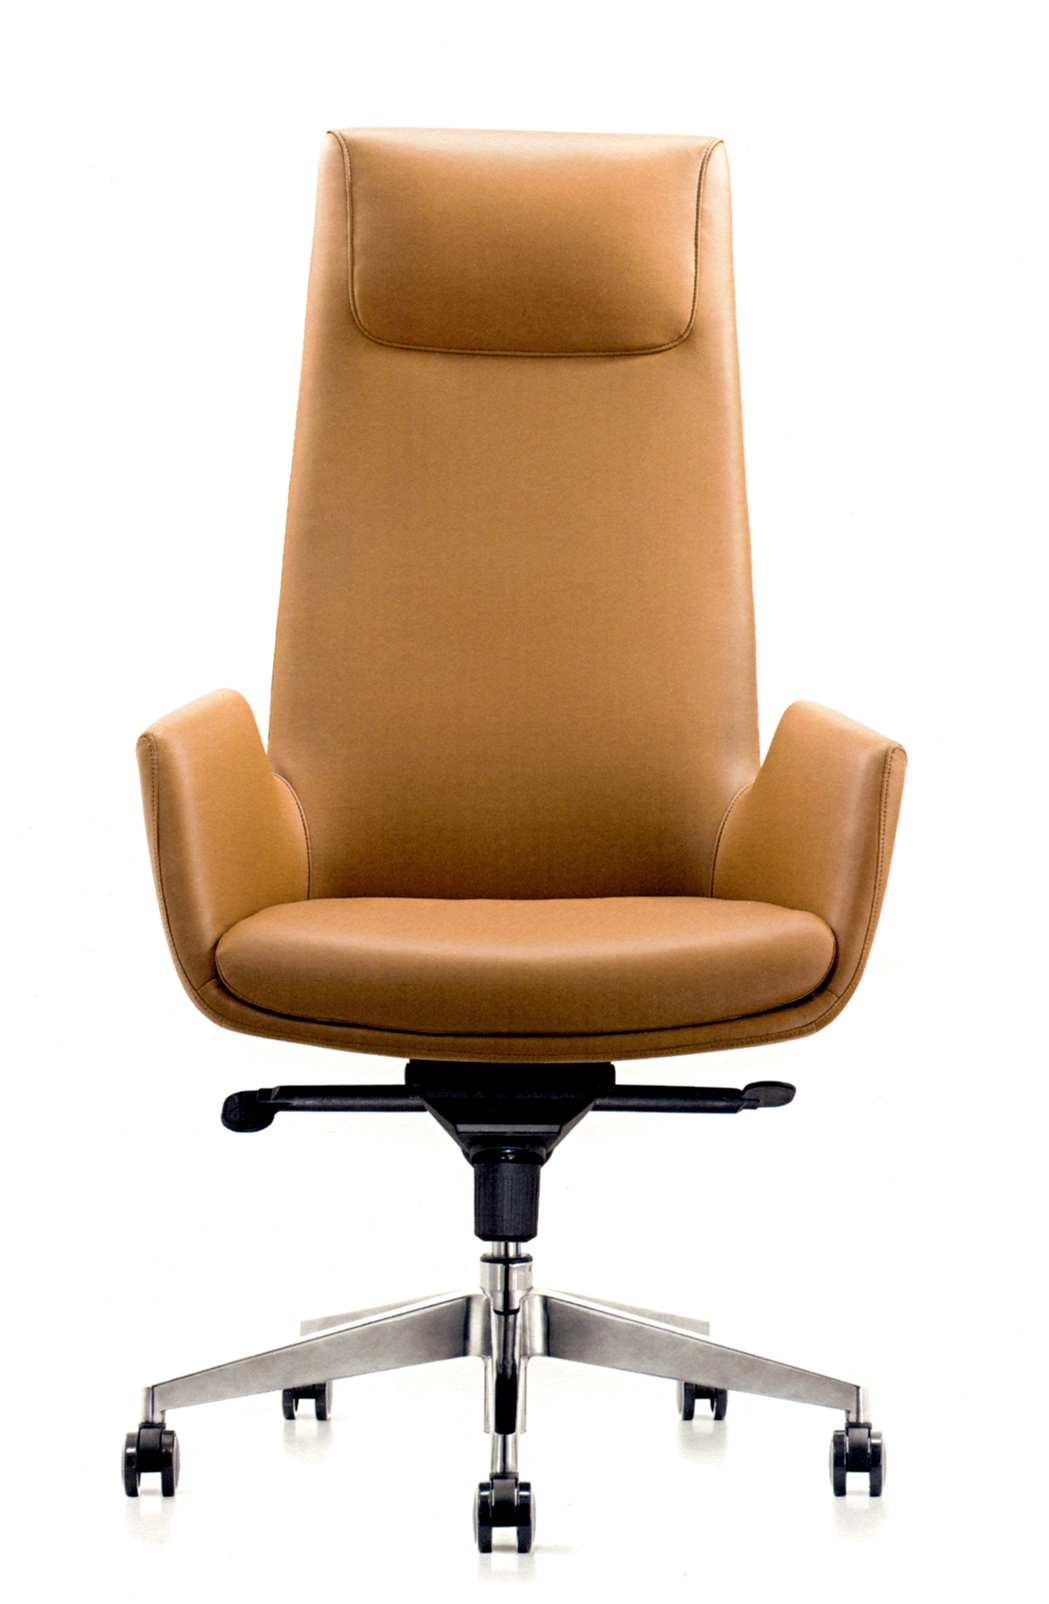 Modern High Back PU Ergonomic Swivel Office Chair Living Room Executive Leather Office Chair